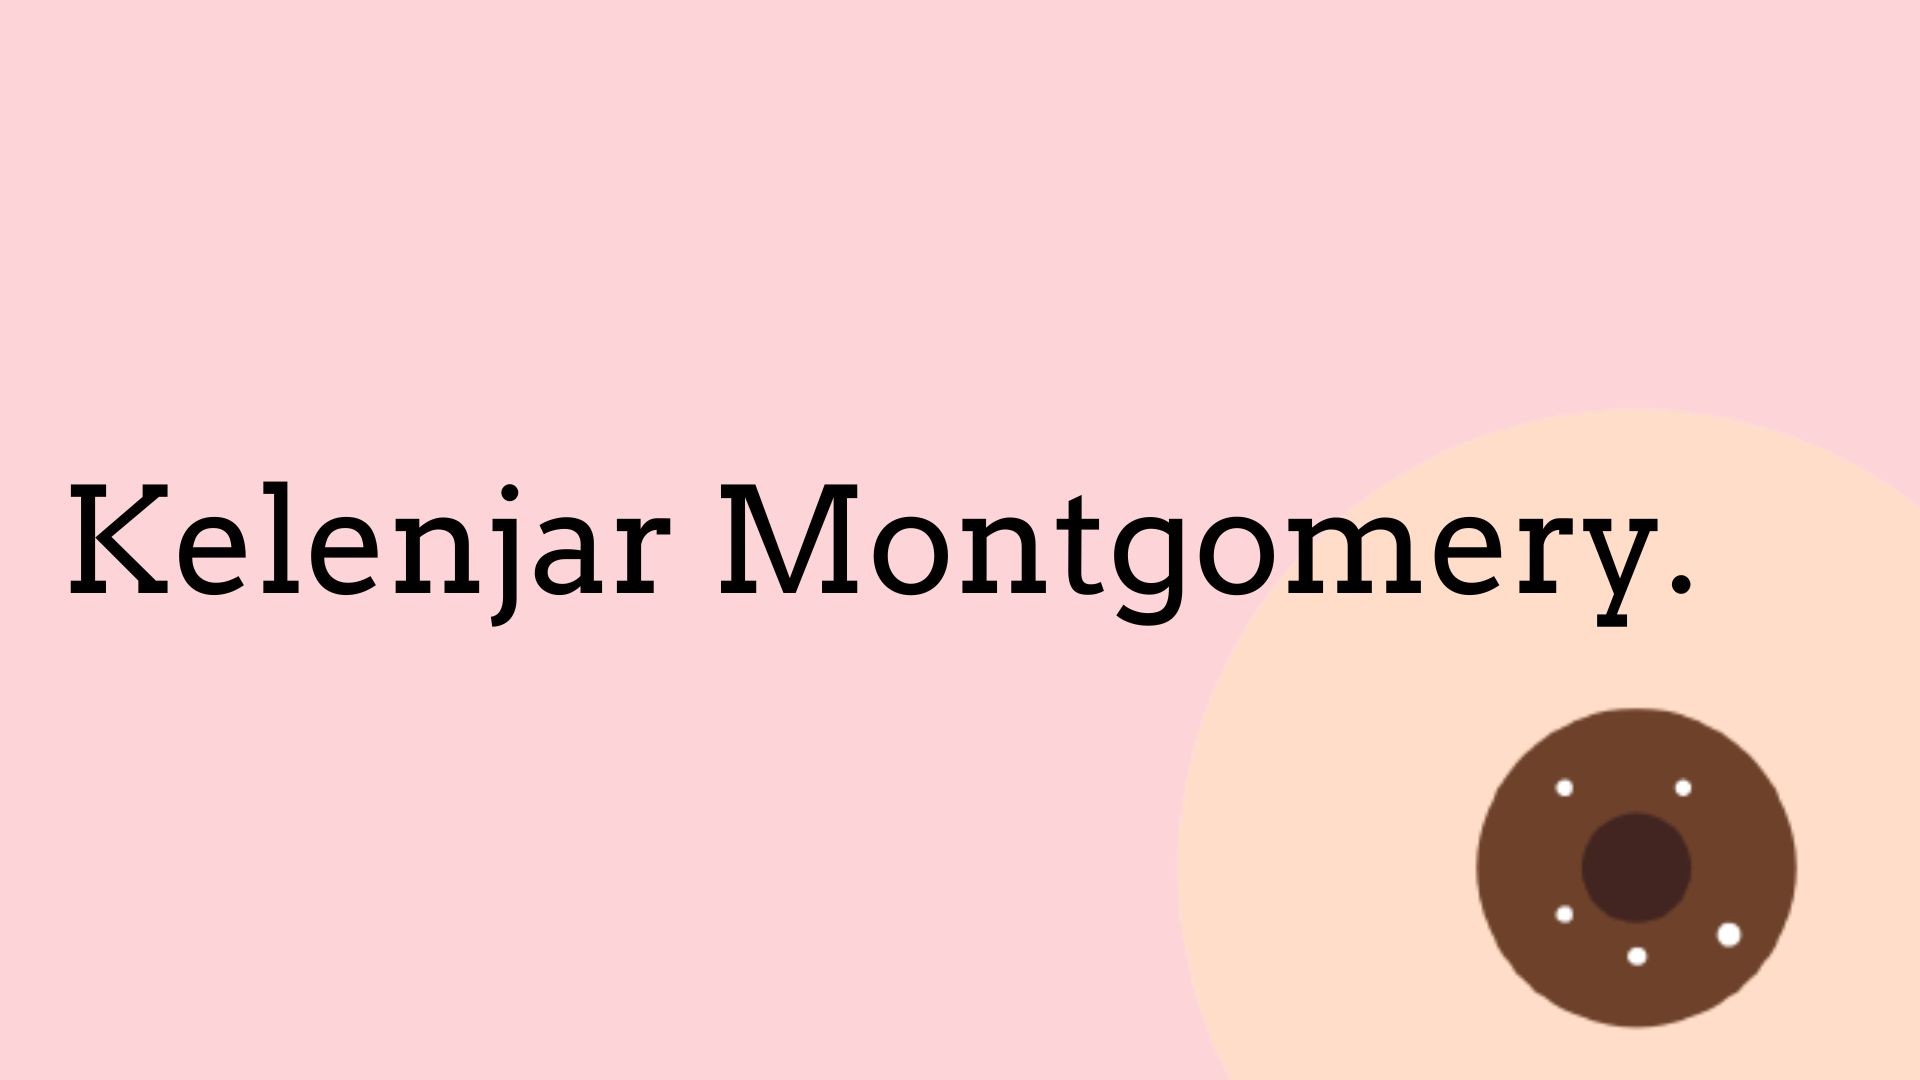 You are currently viewing Kelenjar Montgomery.